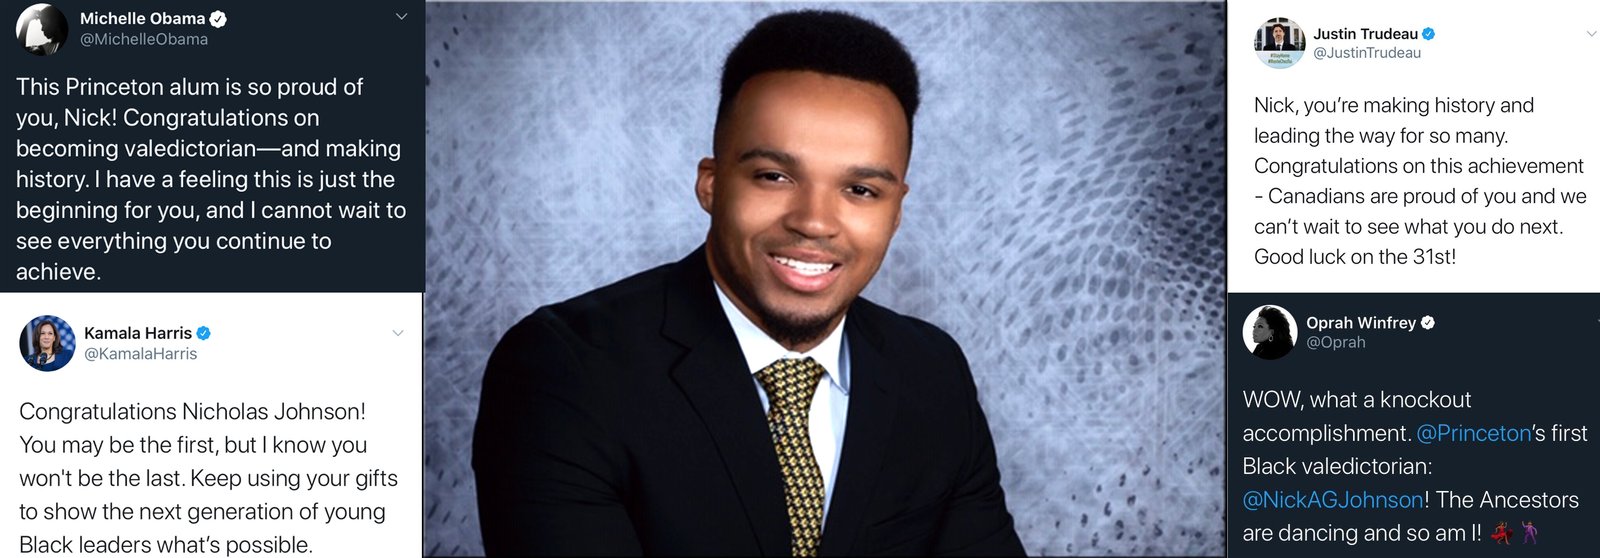 Princeton’s first Black valedictorian Nicholas Johnson: “in love with learning”